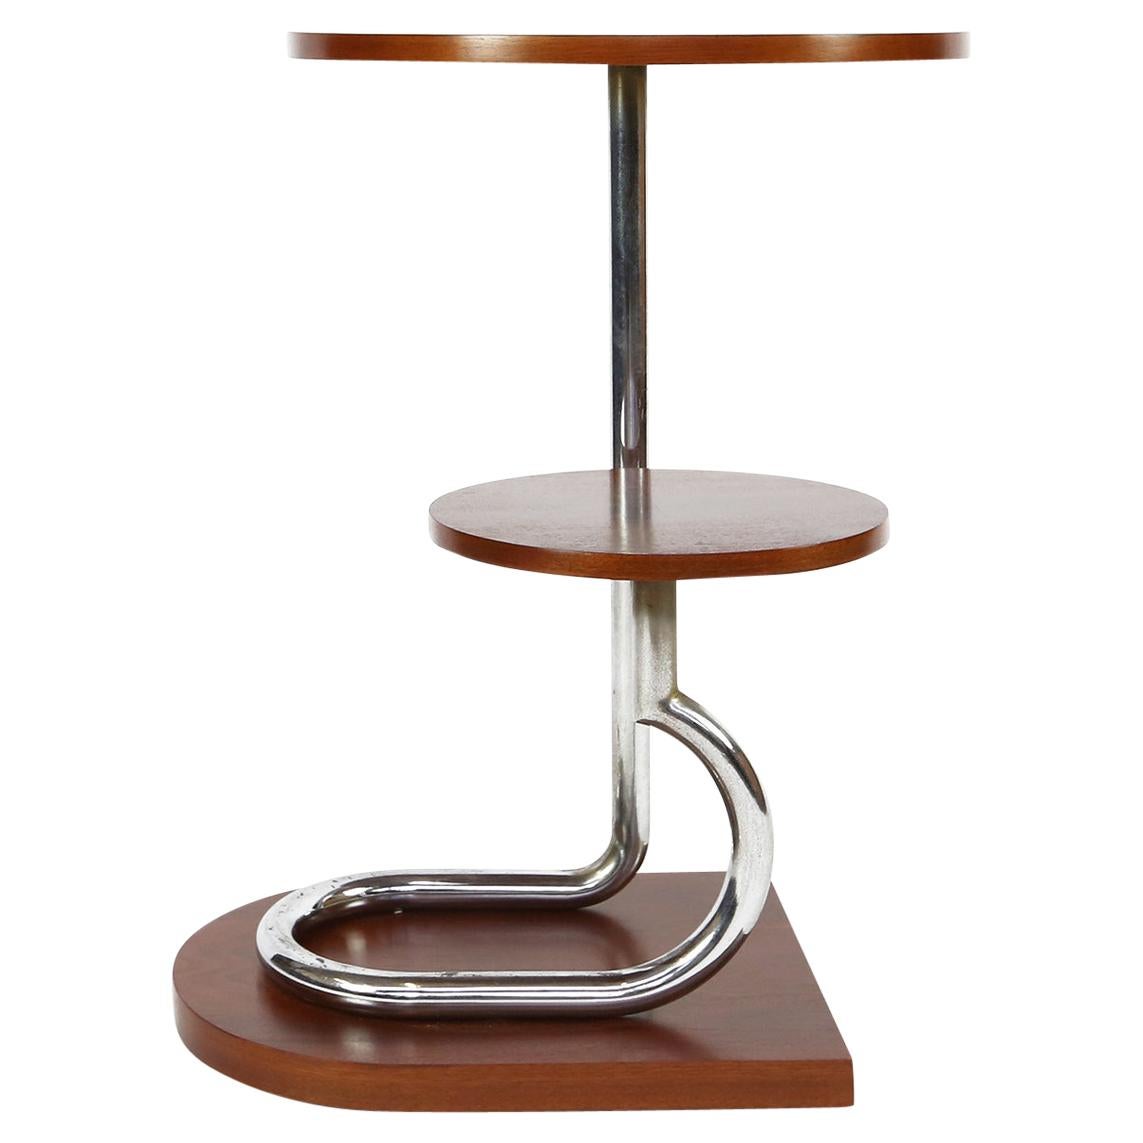 Art Deco Modernist Tubular Table Gueridon or Plant Stand, French, 1930s For Sale